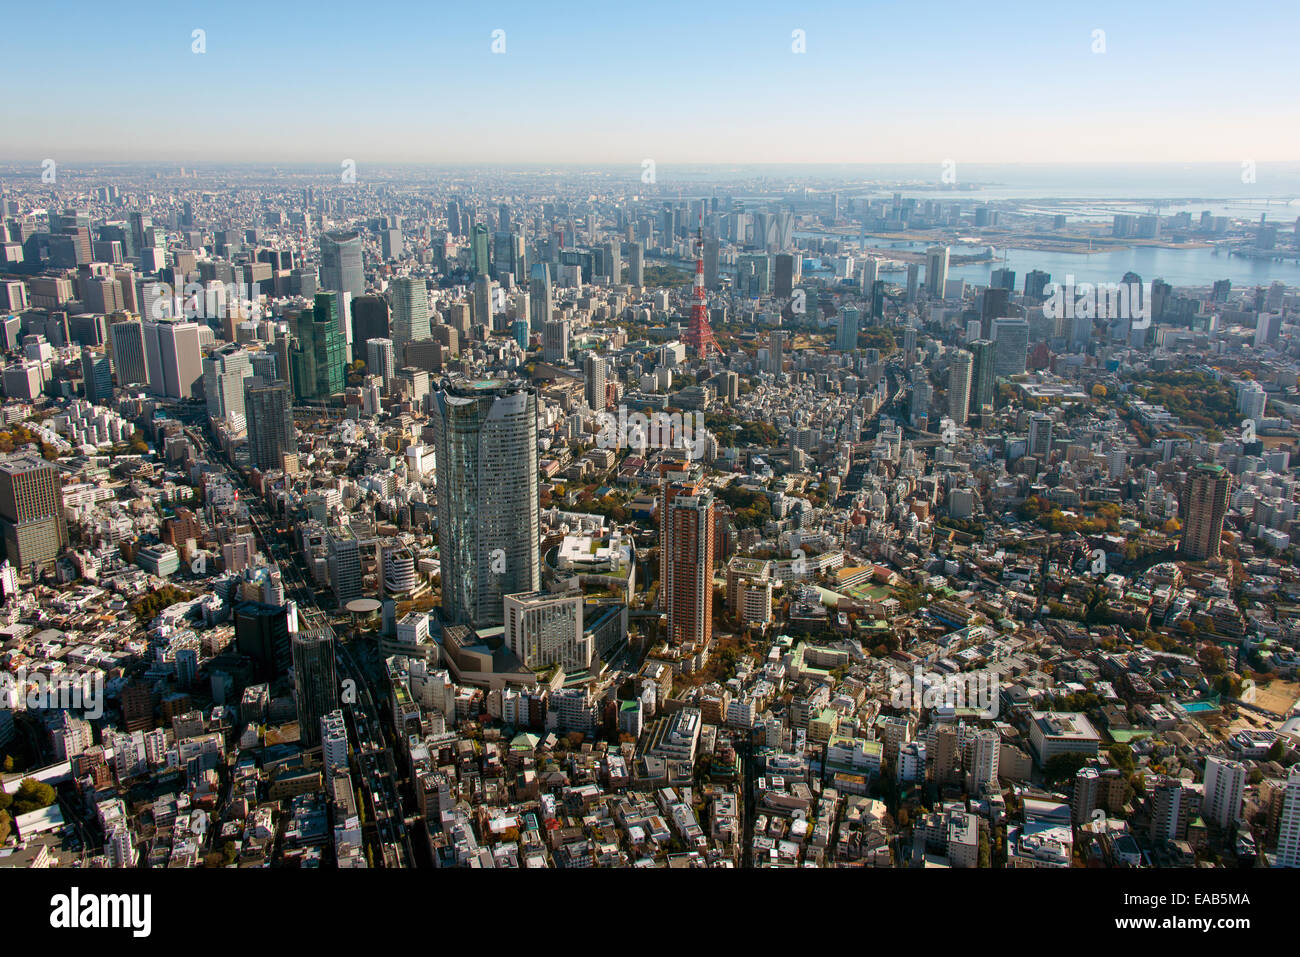 Roppongi hills and Tokyo tower aerial view Stock Photo